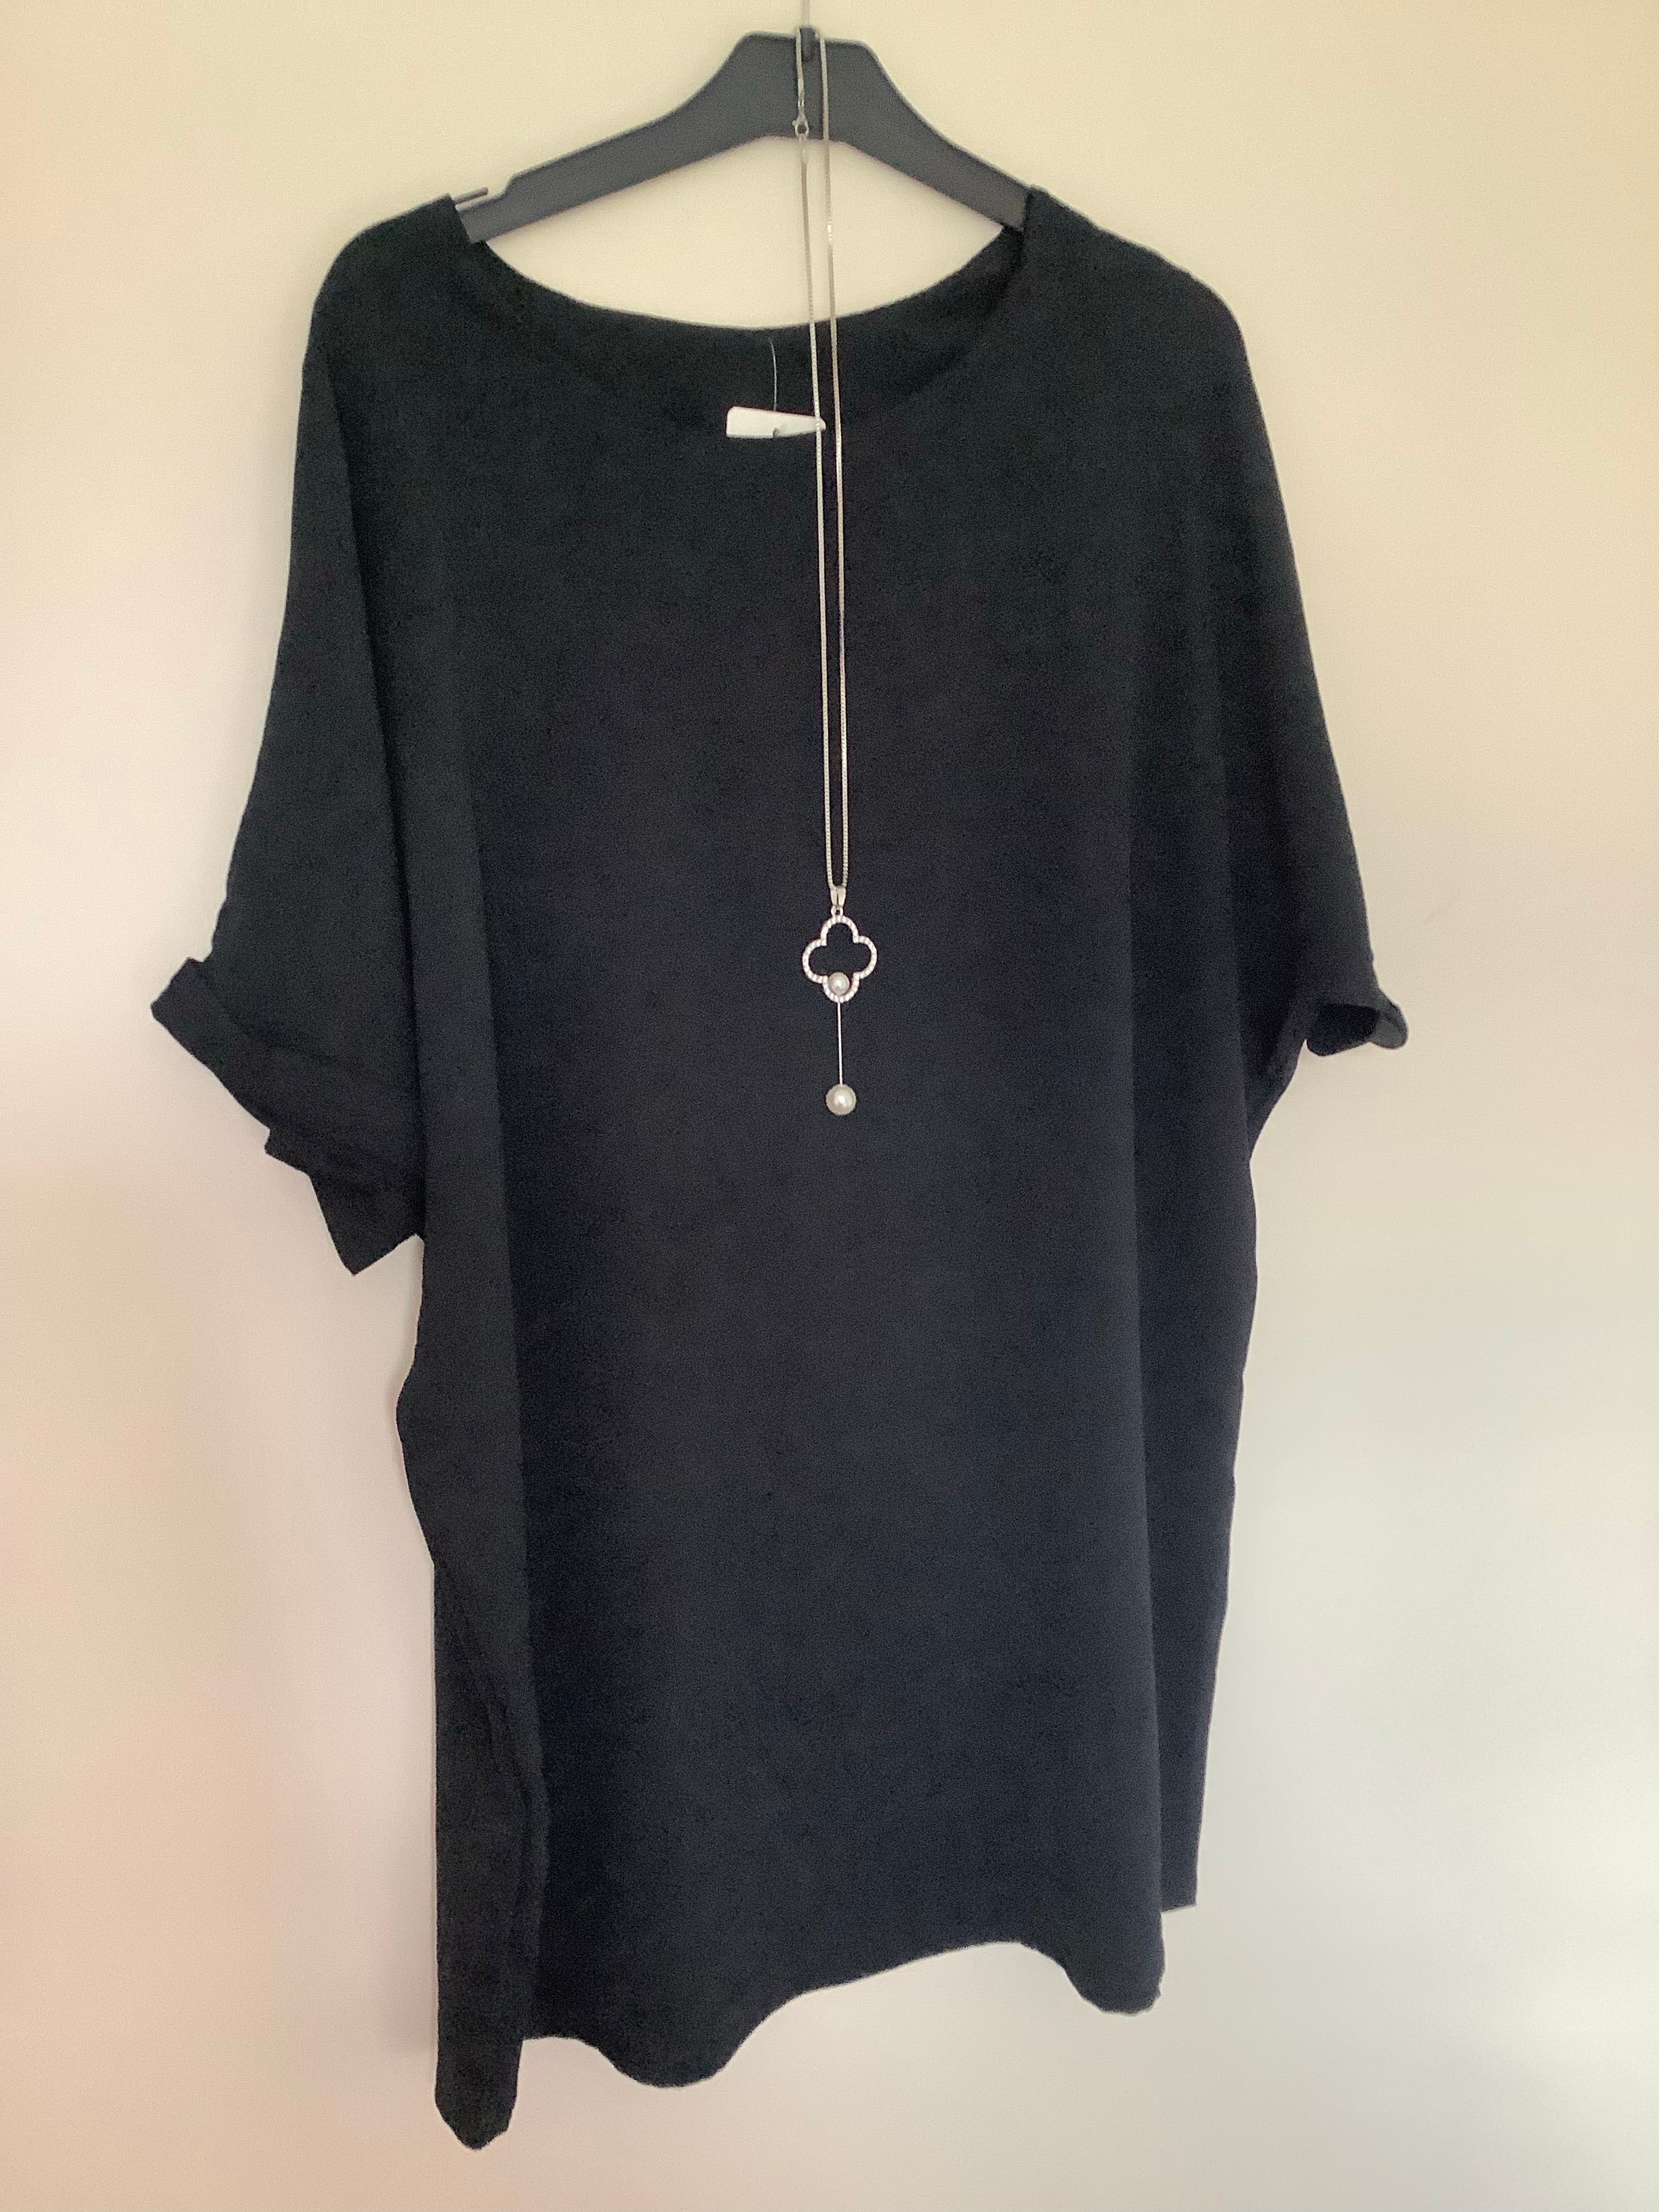 Lexi Oversized Top with Necklace - Black